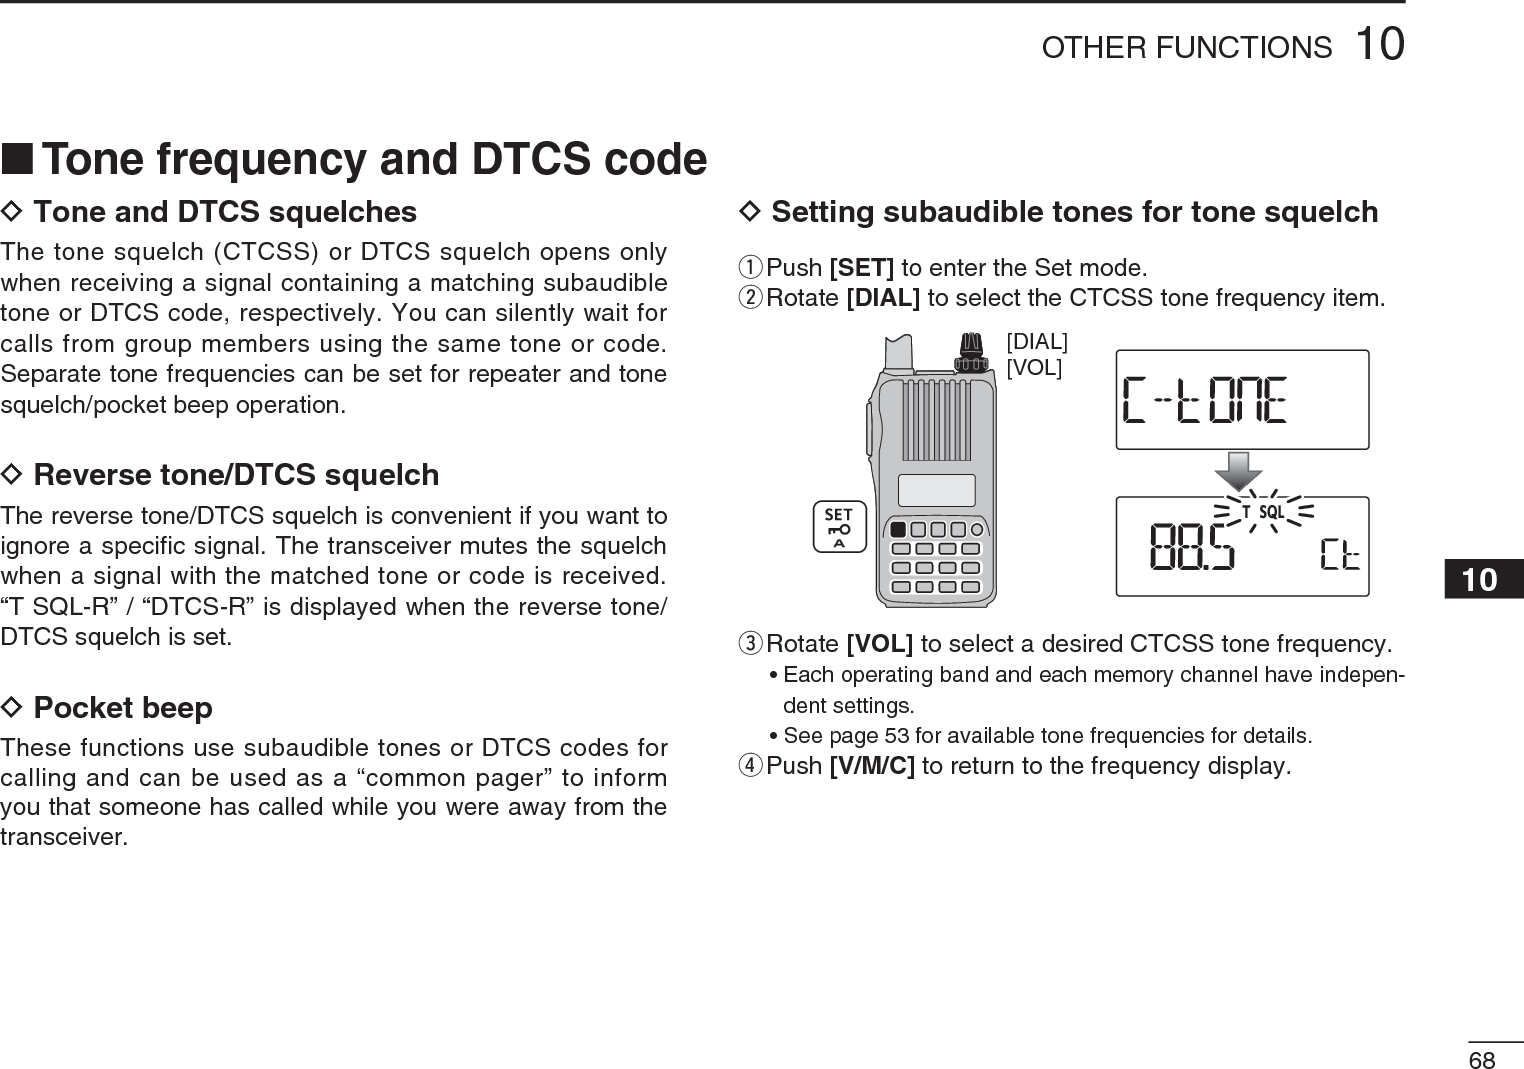 6810OTHER FUNCTIONS12345678910111213141516171819NTone frequency and DTCS codeDTone and DTCS squelchesThe tone squelch (CTCSS) or DTCS squelch opens only when receiving a signal containing a matching subaudible tone or DTCS code, respectively. You can silently wait for calls from group members using the same tone or code. Separate tone frequencies can be set for repeater and tone squelch/pocket beep operation.DReverse tone/DTCS squelchThe reverse tone/DTCS squelch is convenient if you want to ignore a specific signal. The transceiver mutes the squelch when a signal with the matched tone or code is received. “T SQL-R” / “DTCS-R” is displayed when the reverse tone/DTCS squelch is set.DPocket beepThese functions use subaudible tones or DTCS codes for calling and can be used as a “common pager” to inform you that someone has called while you were away from the transceiver.DSetting subaudible tones for tone squelchq  Push [SET] to enter the Set mode.w  Rotate [DIAL] to select the CTCSS tone frequency item.[VOL][DIAL]e  Rotate [VOL] to select a desired CTCSS tone frequency.• Each operating band and each memory channel have indepen-dent settings.• See page 53 for available tone frequencies for details.rPush [V/M/C] to return to the frequency display.